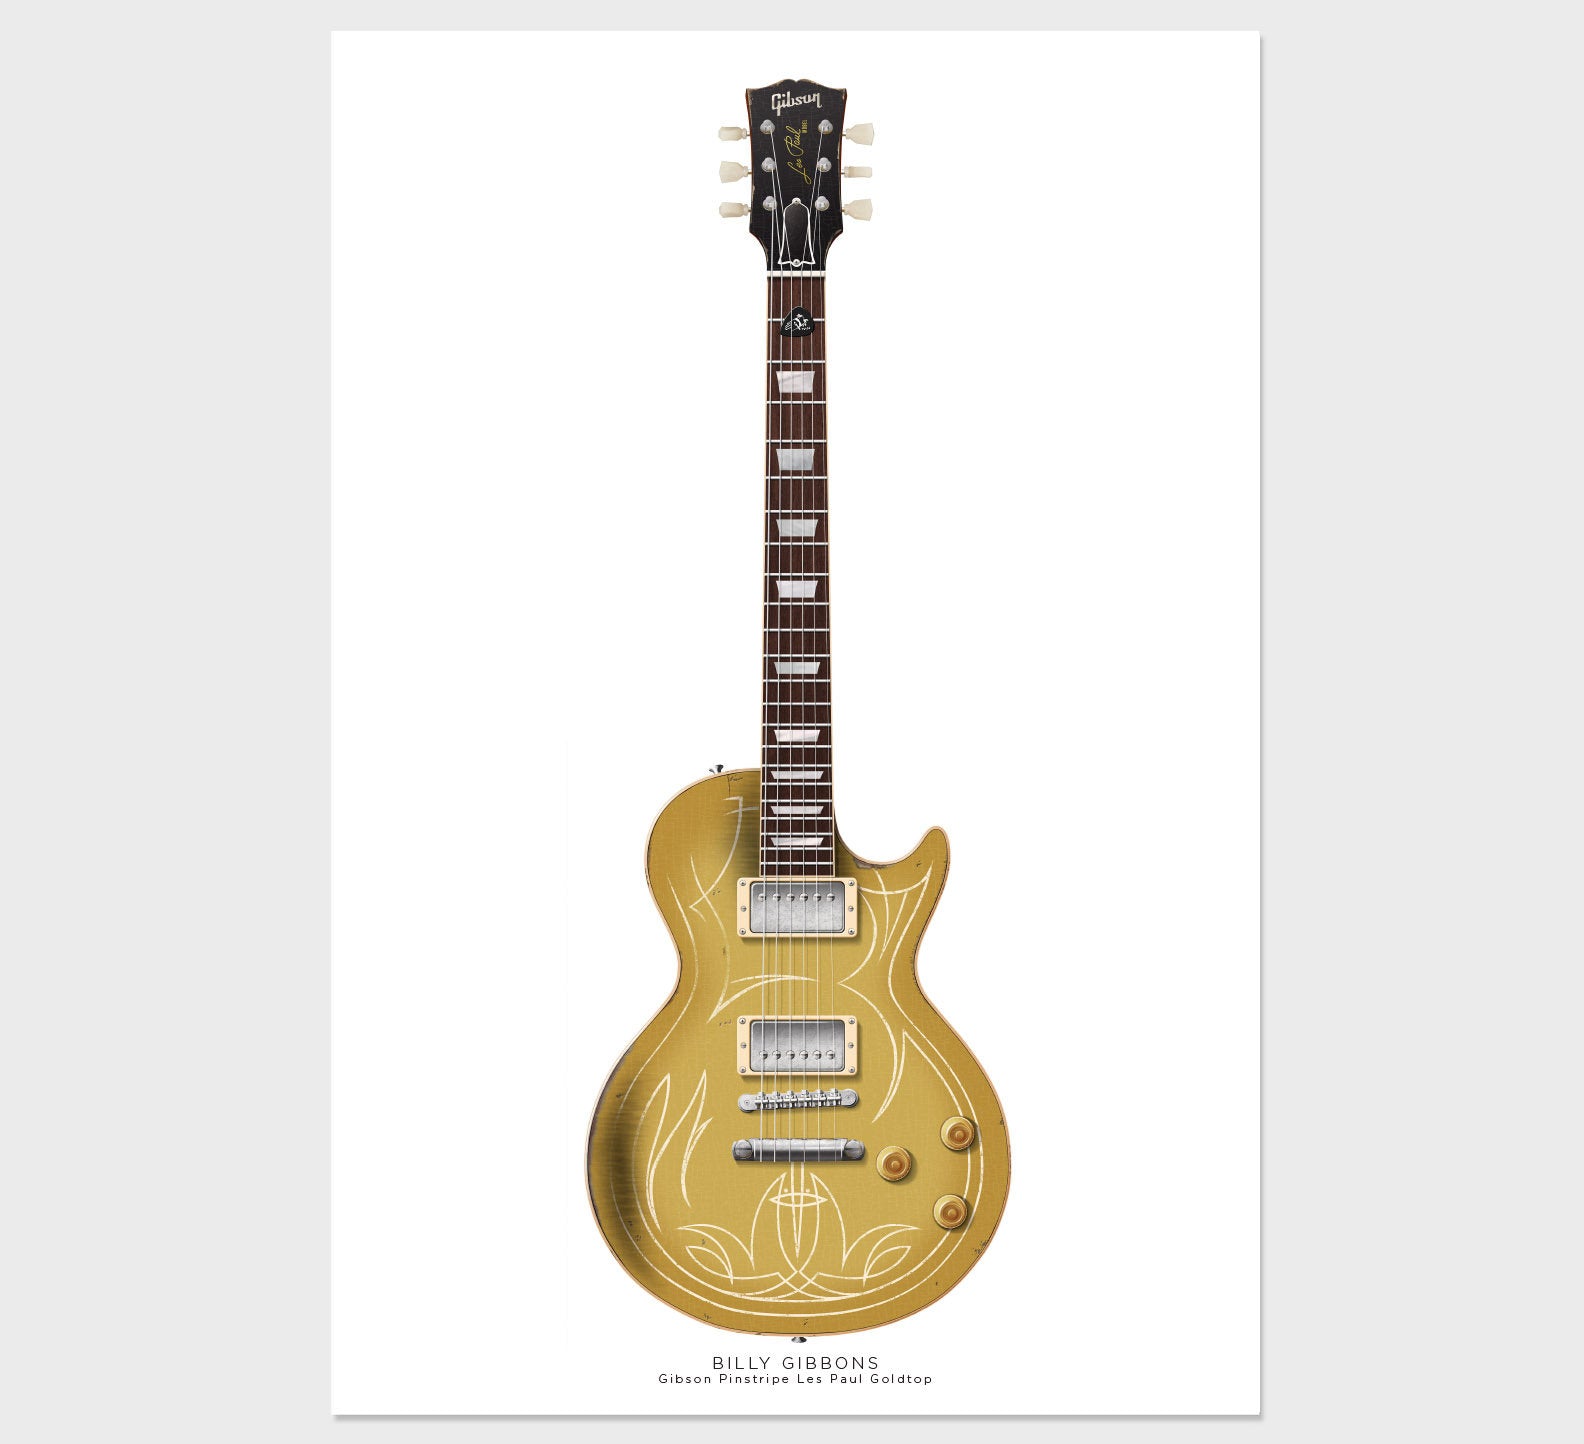 Billy Gibbons's Gibson Pinstripe Les Paul Goldtop Guitar Poster